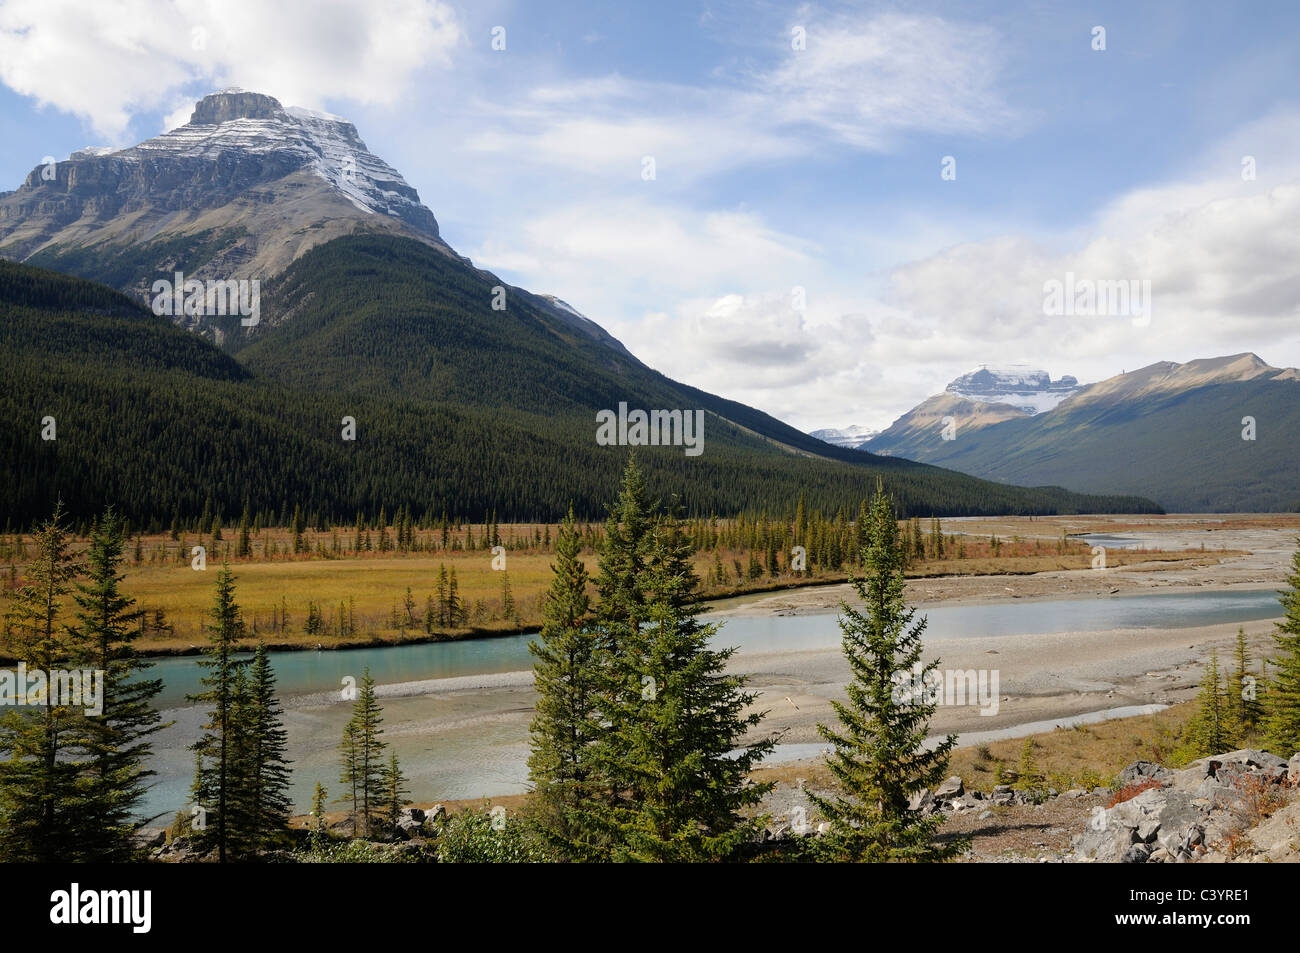 Rocky Mountains, Icefield Parkway, course of a river, fall, fall colours, Athabasca River, Jasper National Park, Alberta, Canada Stock Photo